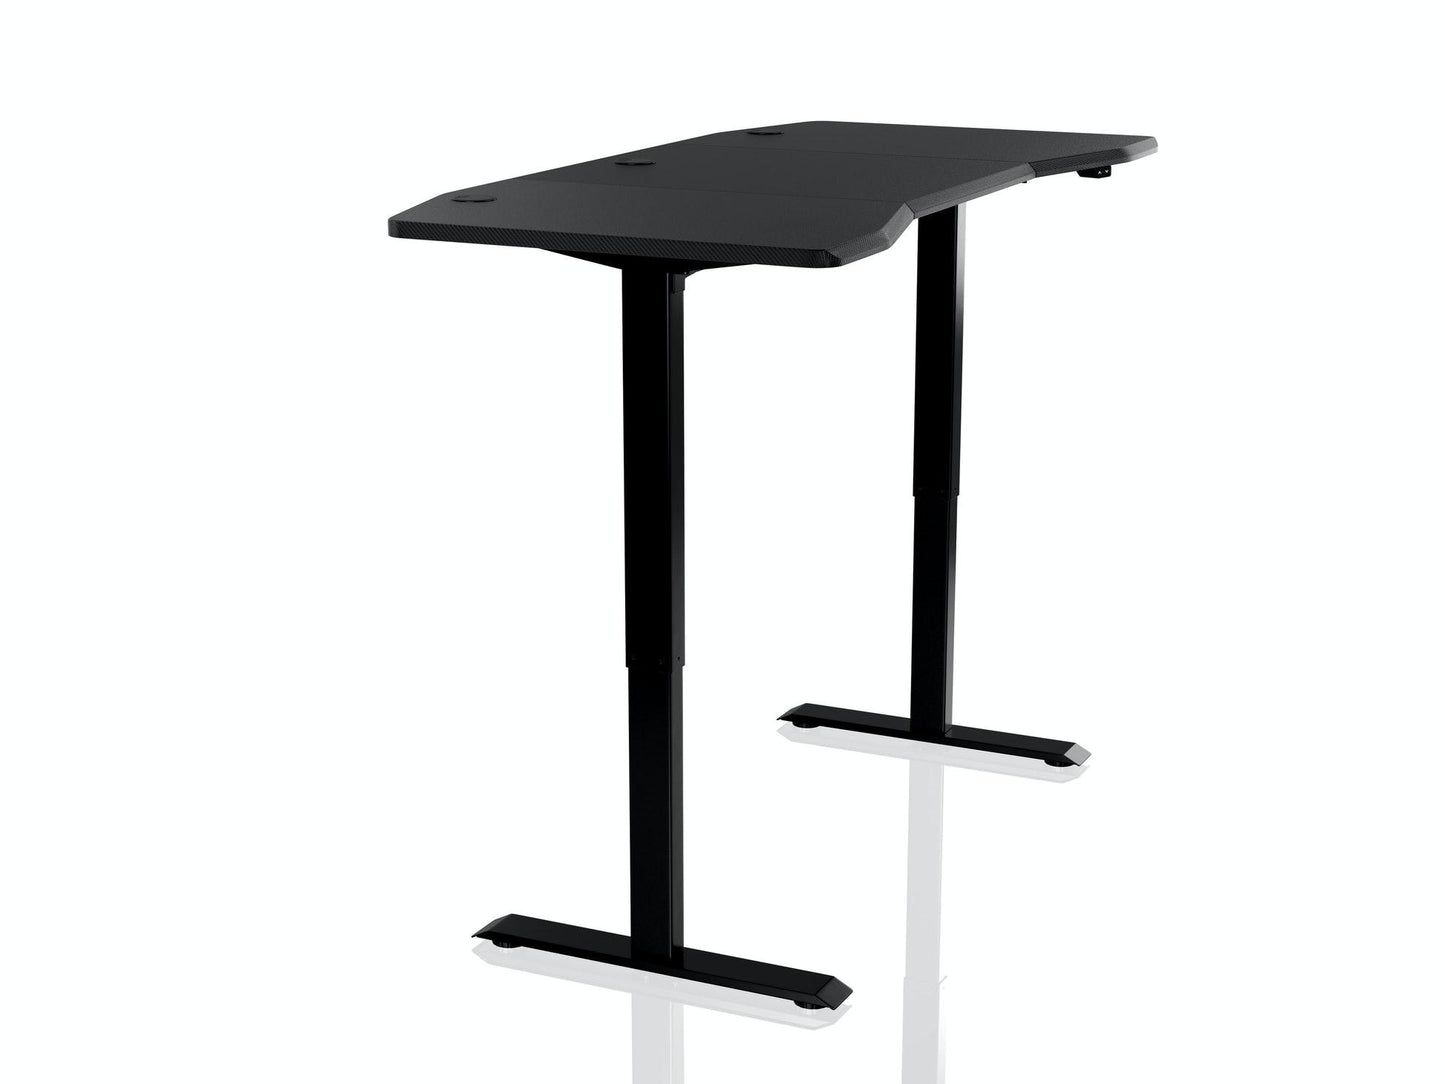 *SUMMER HOME OFFERS* NITRO D16E GAMING DESK 160X80CM CARBON BLACK. ELECTRICAL ADJUSTABLE HEIGHT